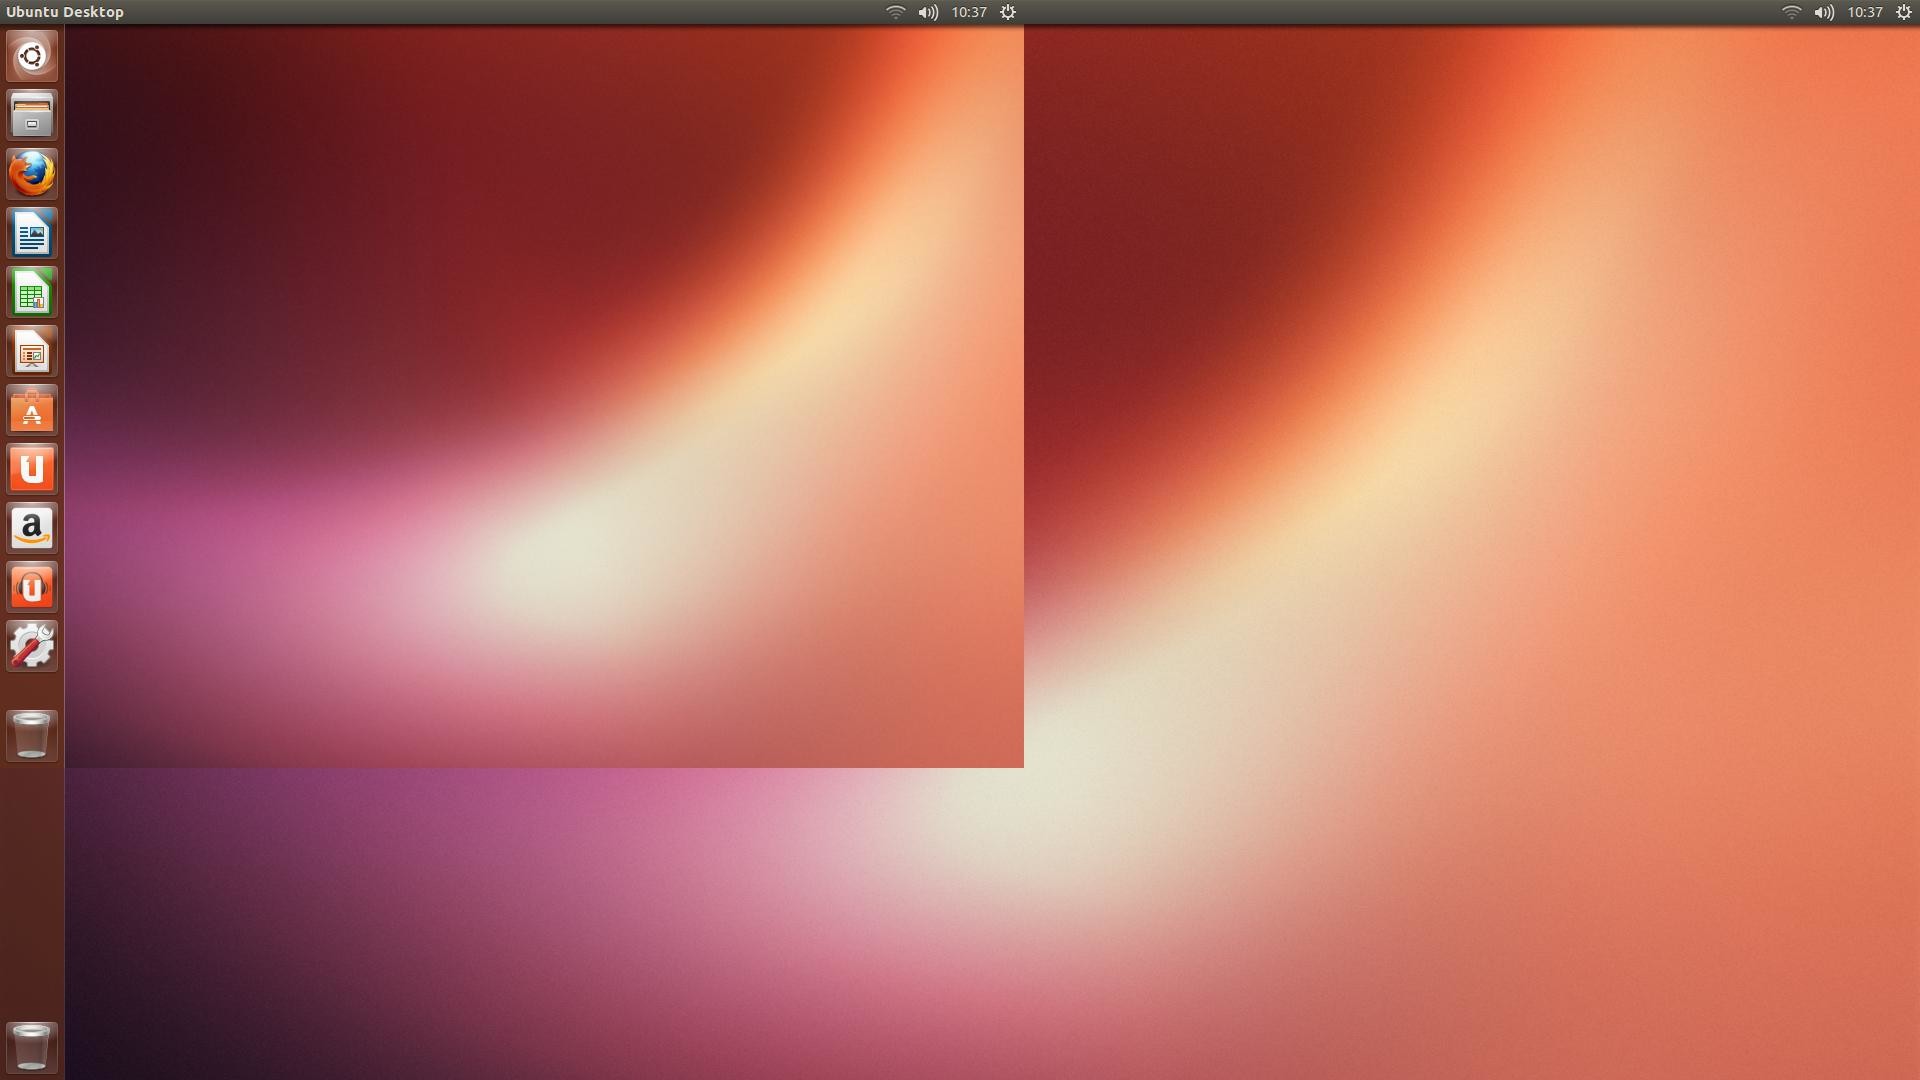 1920x1080 I have a double task bar (sound/clock/settings buttons) and that there is a  smaller wallpaper in the top left corner of my desktop; as shown: